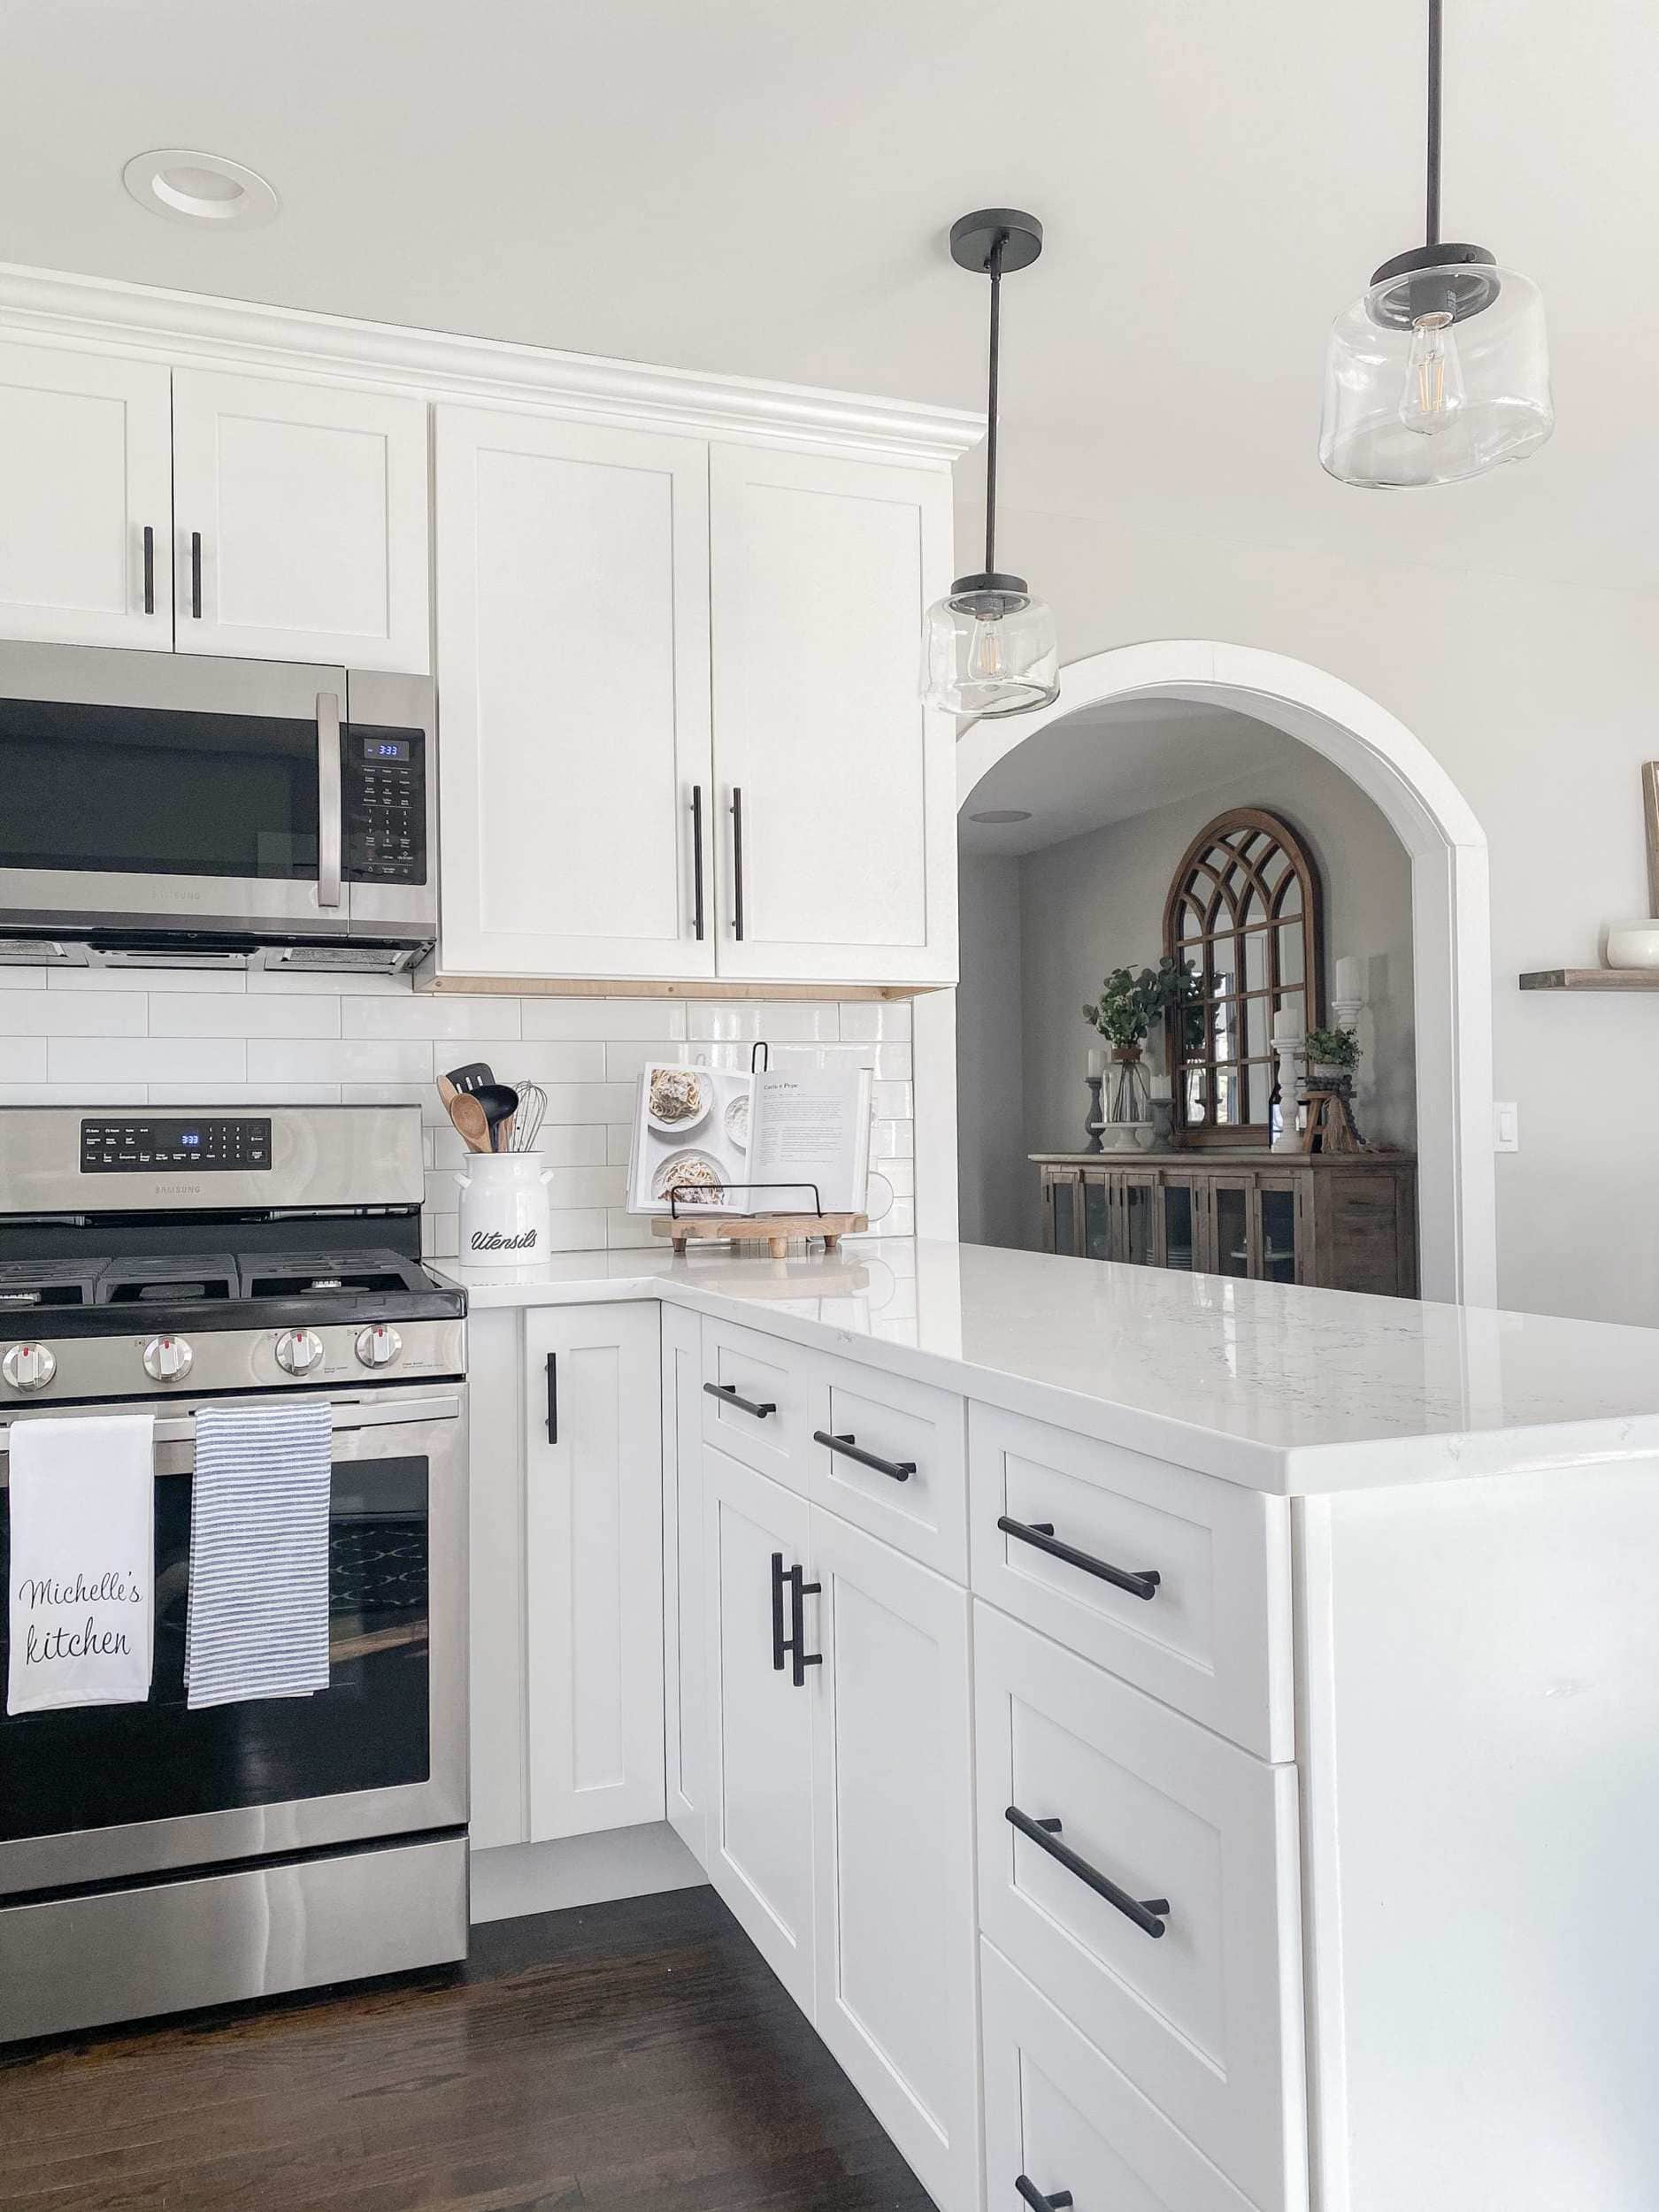 the after of the kitchen renovation with white shaker style cabinets, black modern farmhouse pulls, black simple schoolhouse pendants, and samsung appliances 